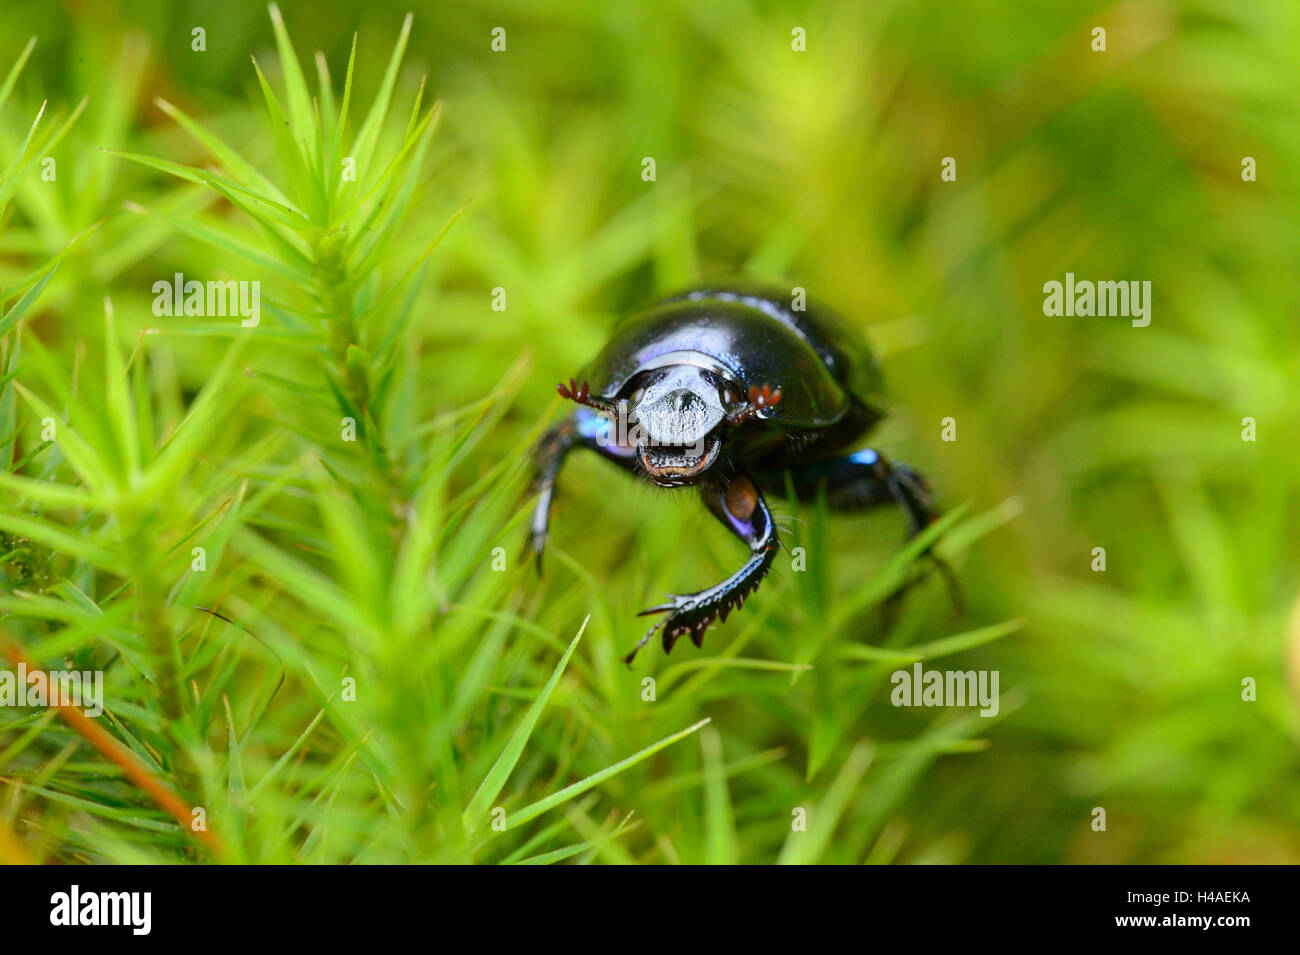 dung beetle, Anoplotrupes stercorosus, moss, head-on, looking at camera, Stock Photo